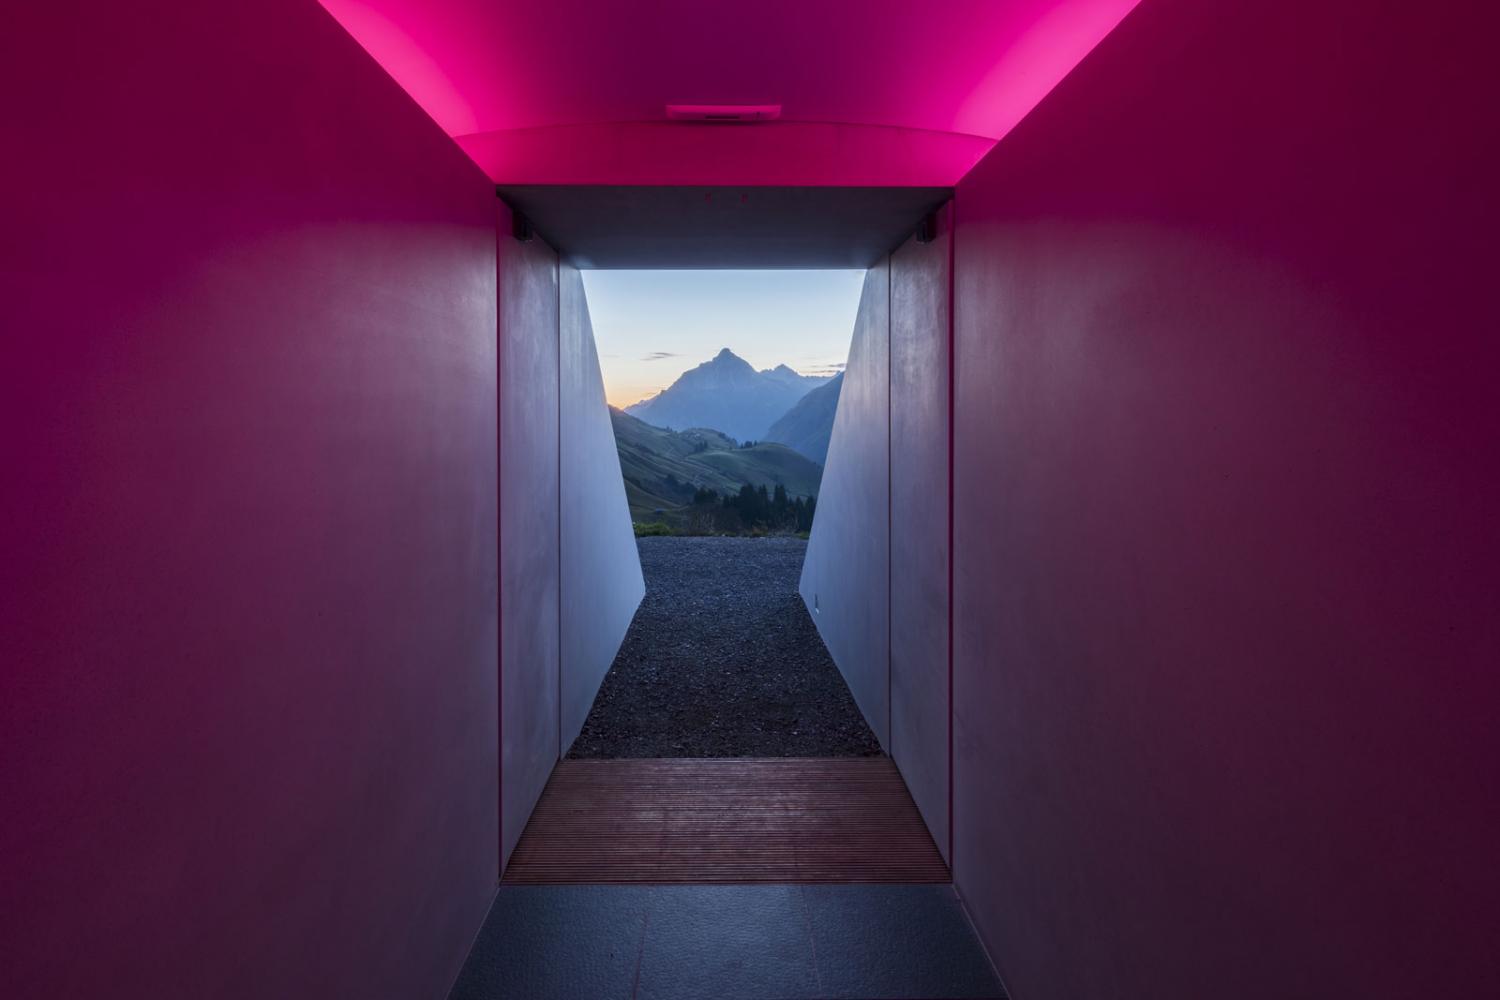 Skyspace by James Turrell